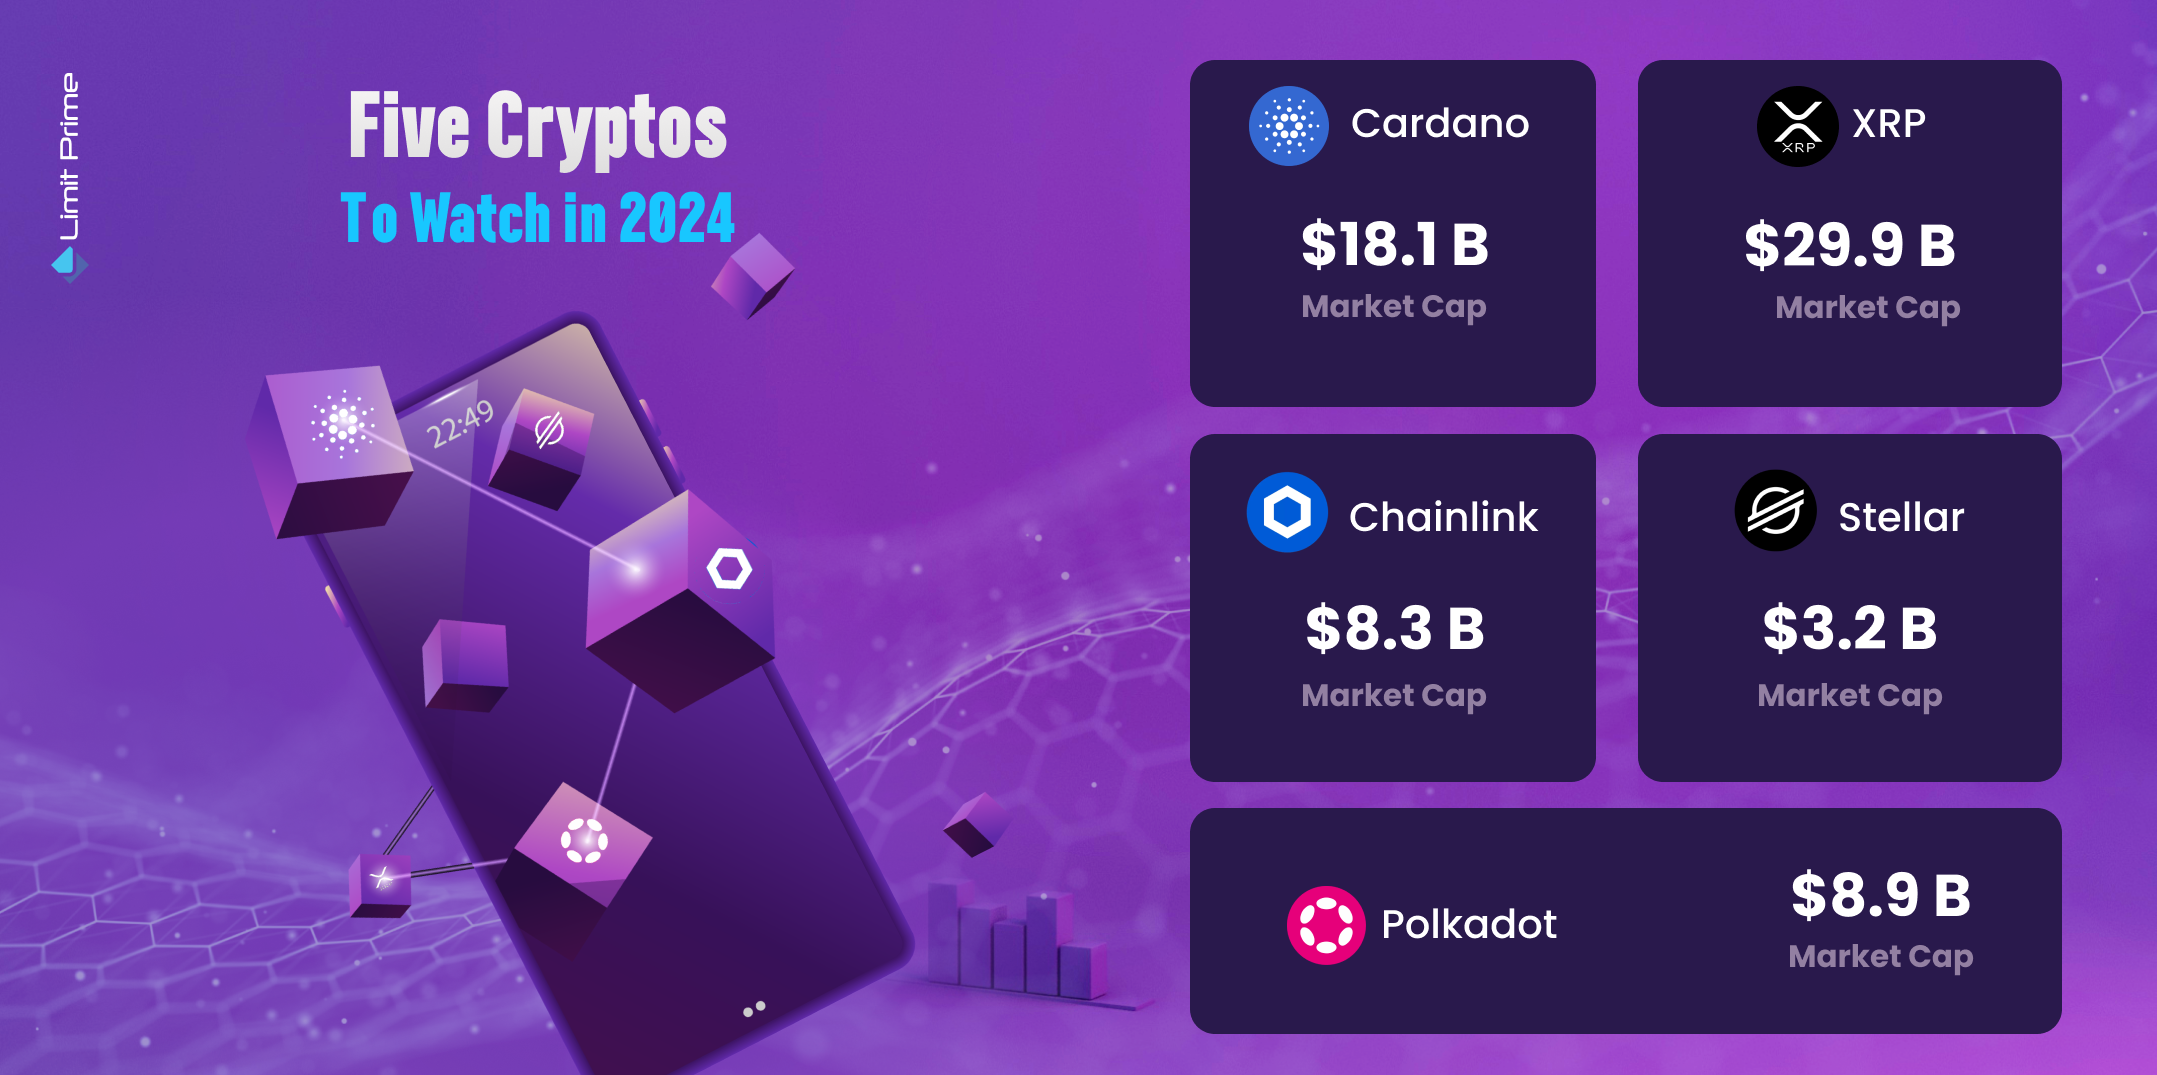 Five Cryptos To Watch In 2024